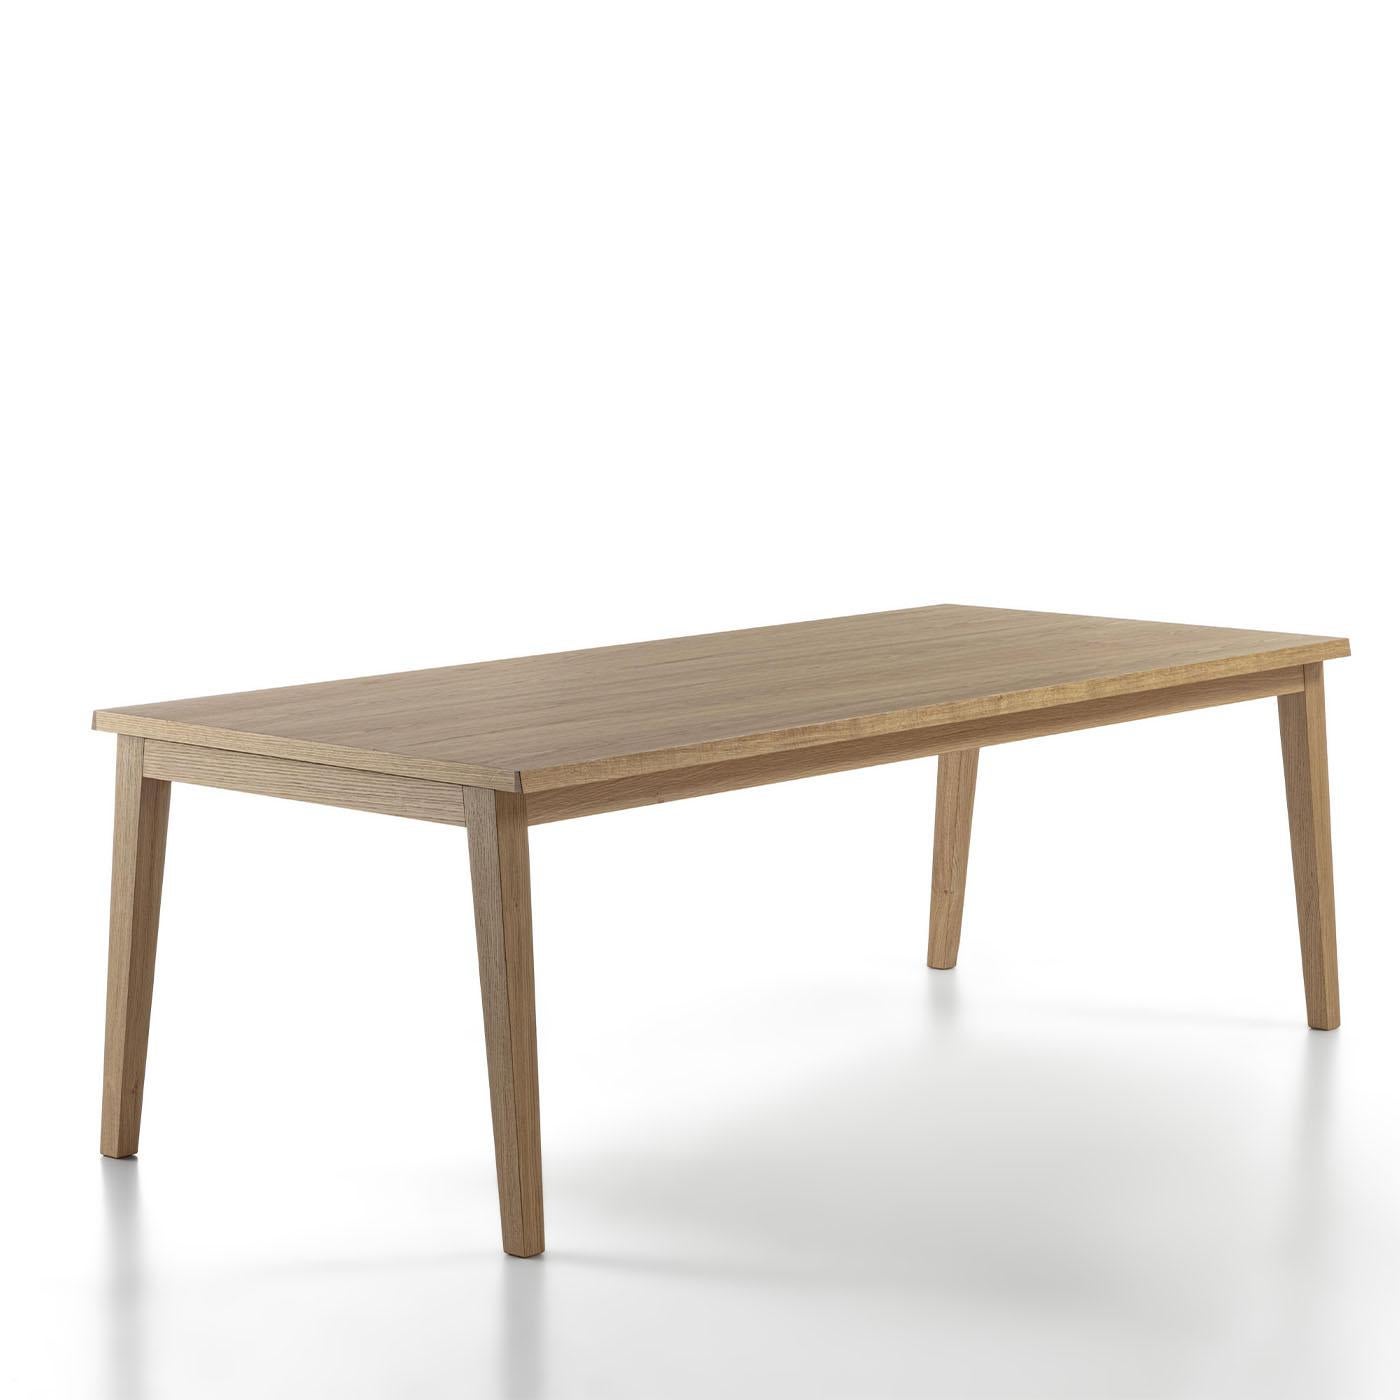 The epitome of pure minimalism, this oak dining table makes for the ideal solution for gathering family and friends around to share a meal together while surprising them with the uniqueness of its grain. A system allowing extension can be inserted